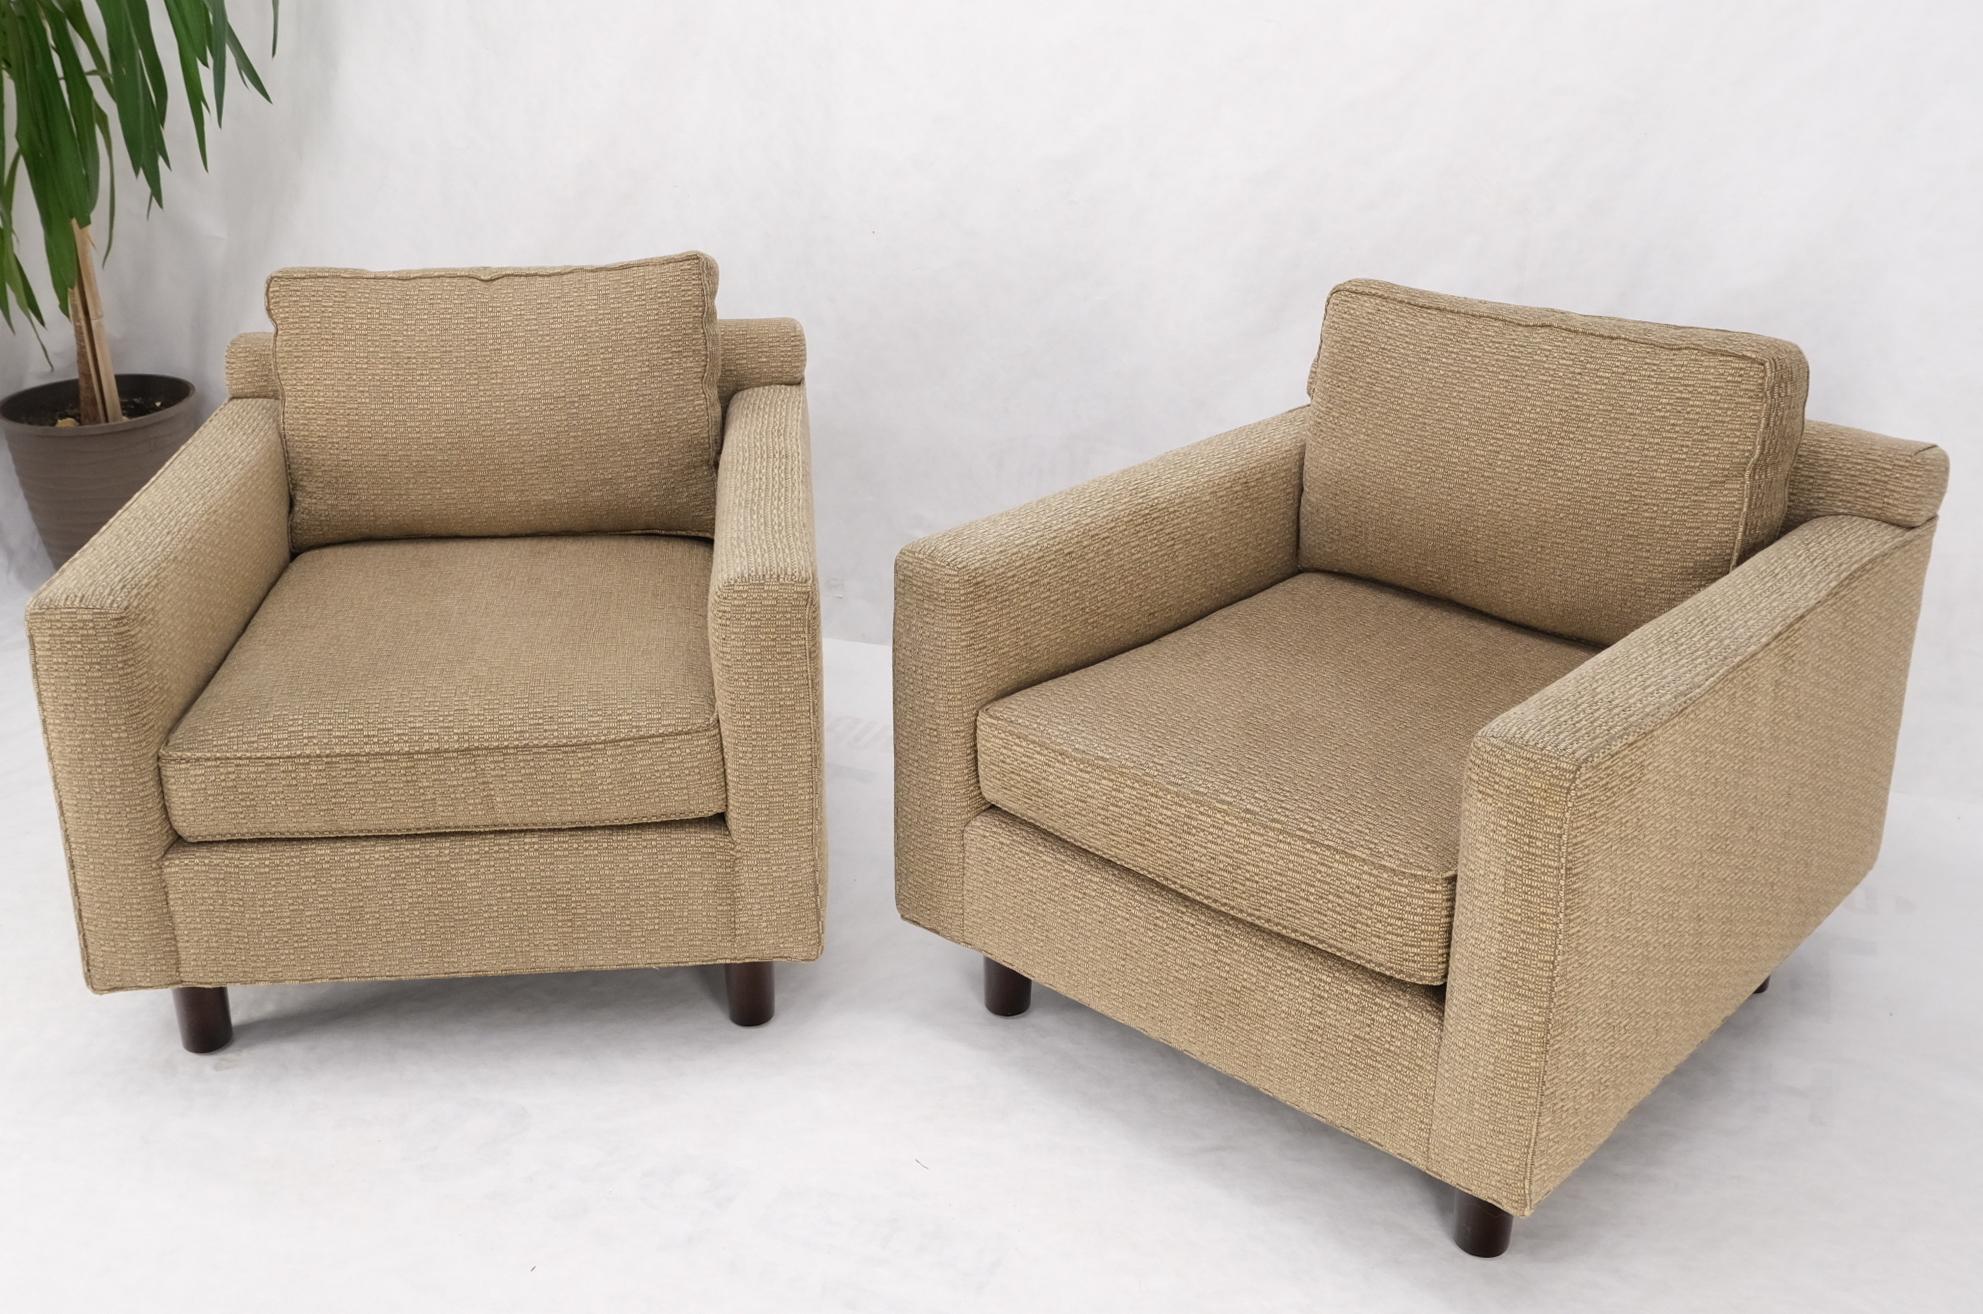 Pair of deep oatmeal fabric upholstery contemporary lounge chair on dowel legs.